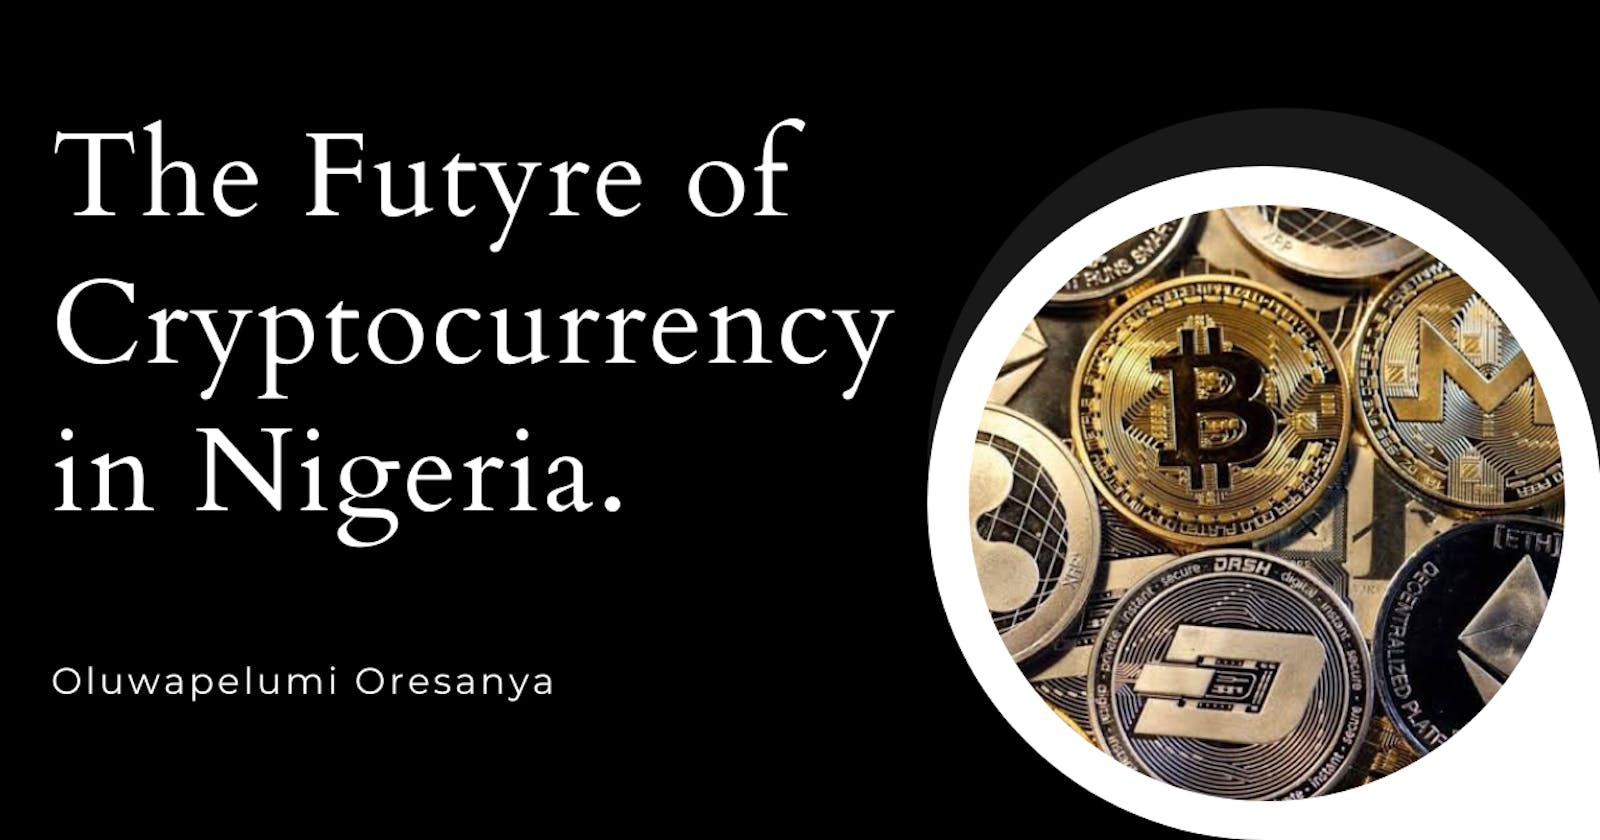 The Future of Cryptocurrency in Nigeria.